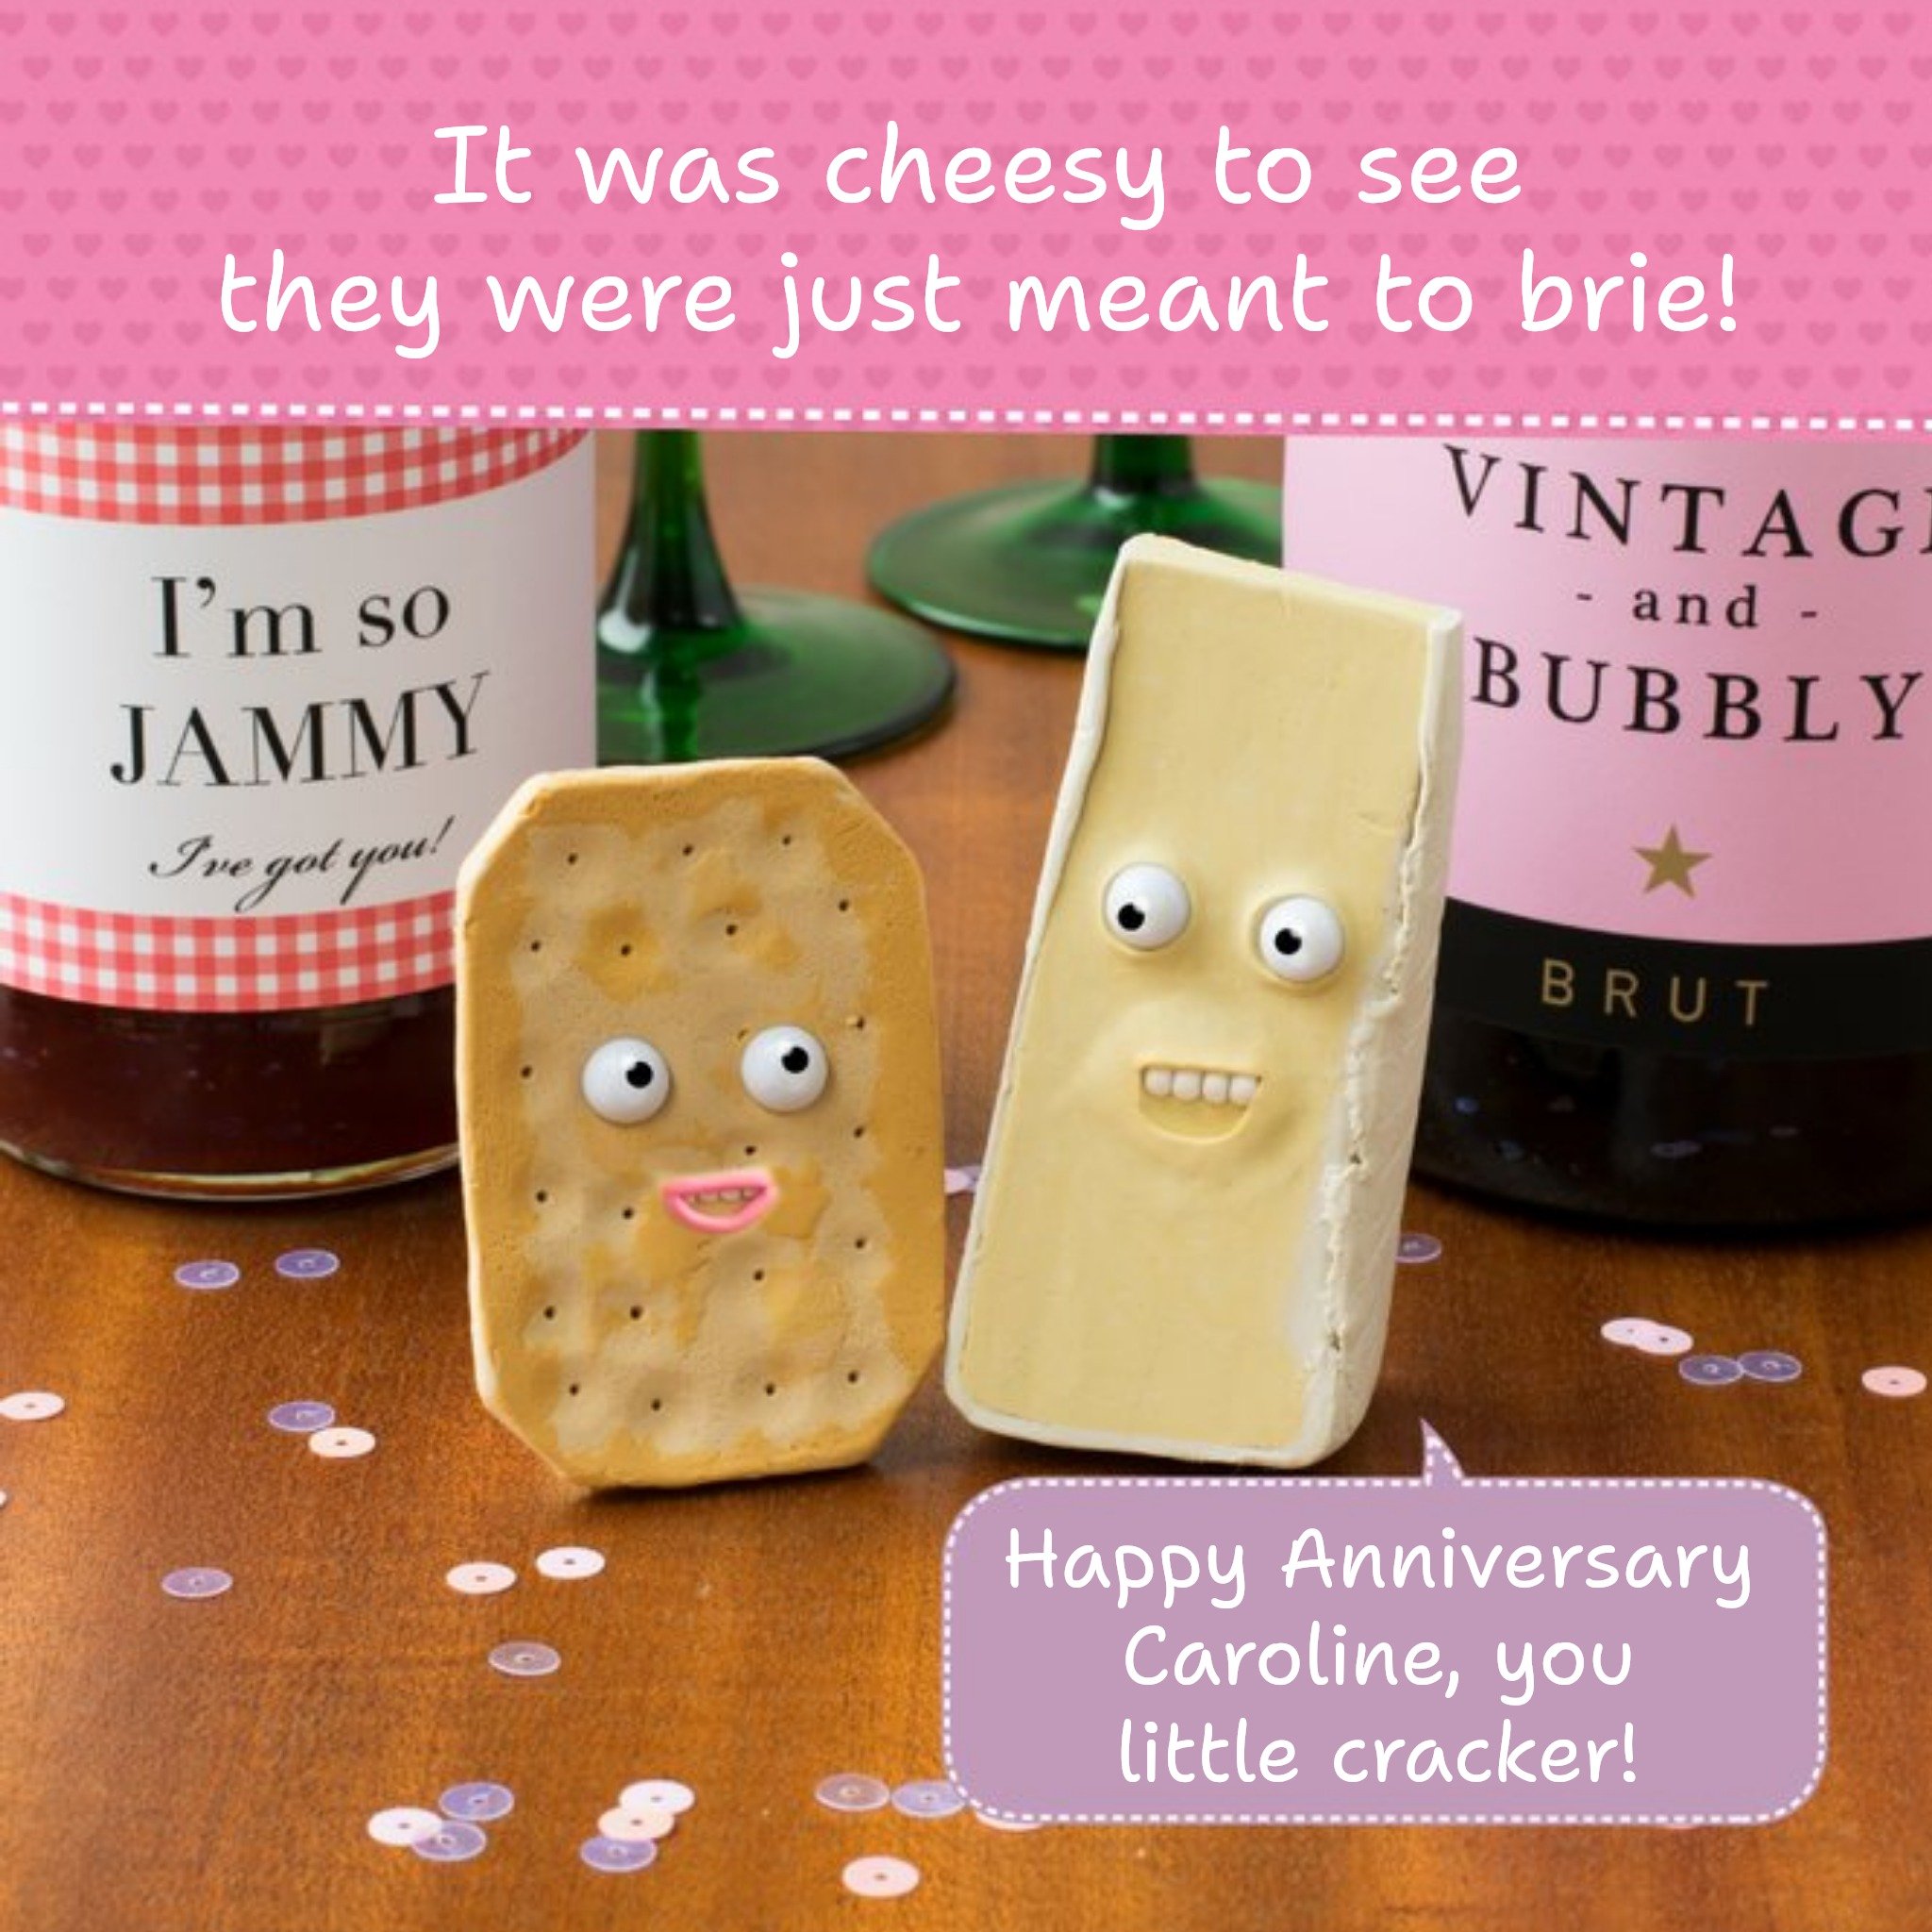 Moonpig They Were Just Meant To Brie Personalised Happy Anniversary Card, Large